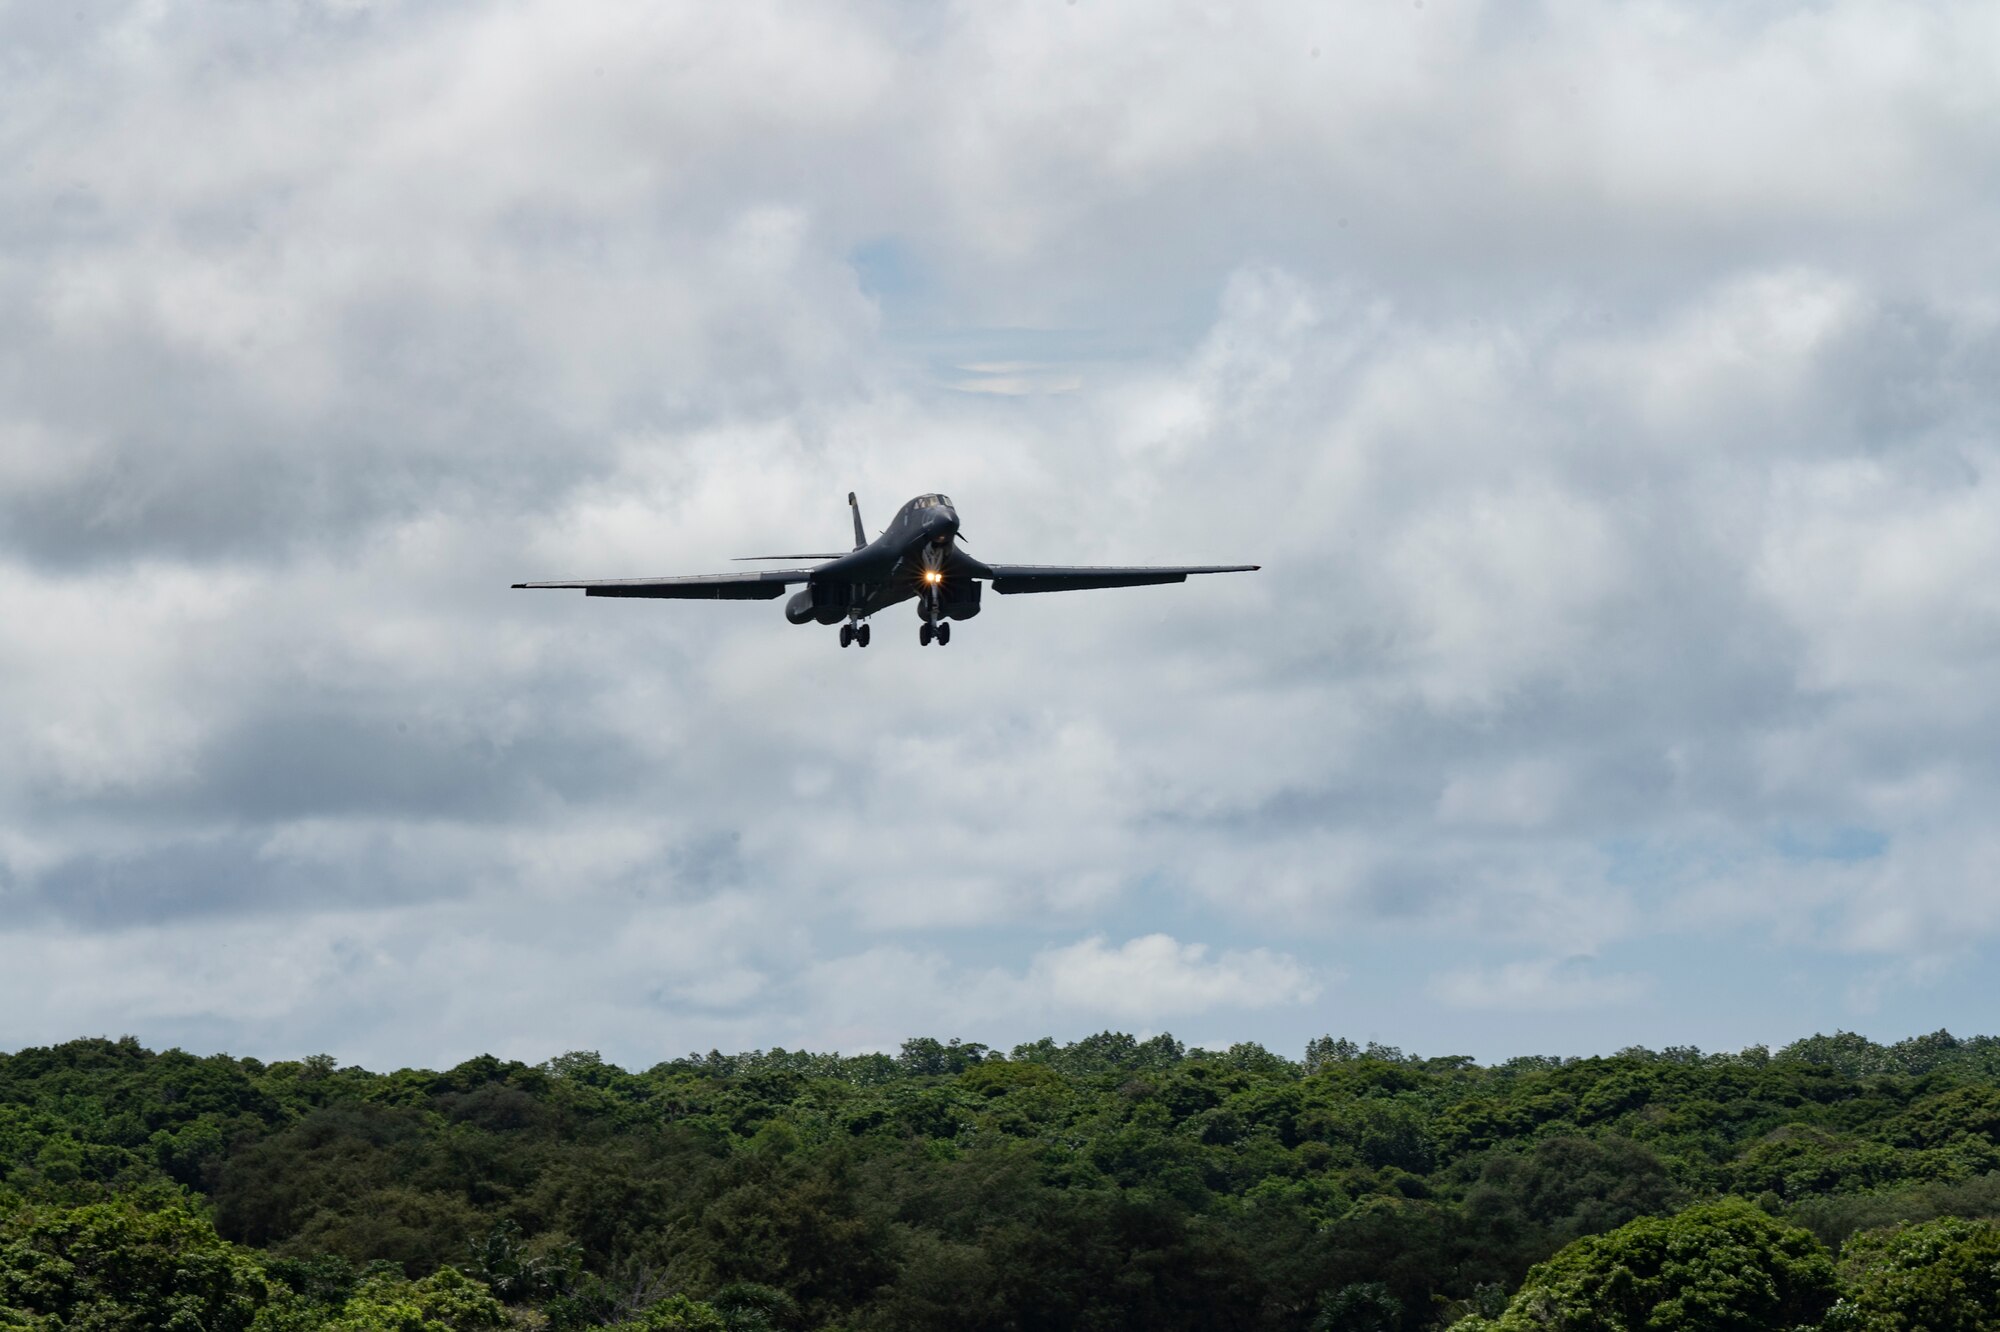 A U.S. Air Force B-1B Lancer assigned to the 37th Expeditionary Bomb Squadron, Ellsworth Air Force Base, South Dakota, prepares to land at Andersen AFB, Guam, for a Bomber Task Force mission, Oct. 18, 2022. The Lancer’s blended wing/body configuration, variable-geometry wings and turbofan afterburning engines combine to provide long range maneuverability and high speed while enhancing survivability. (U.S. Air Force photo by Staff Sgt. Hannah Malone)